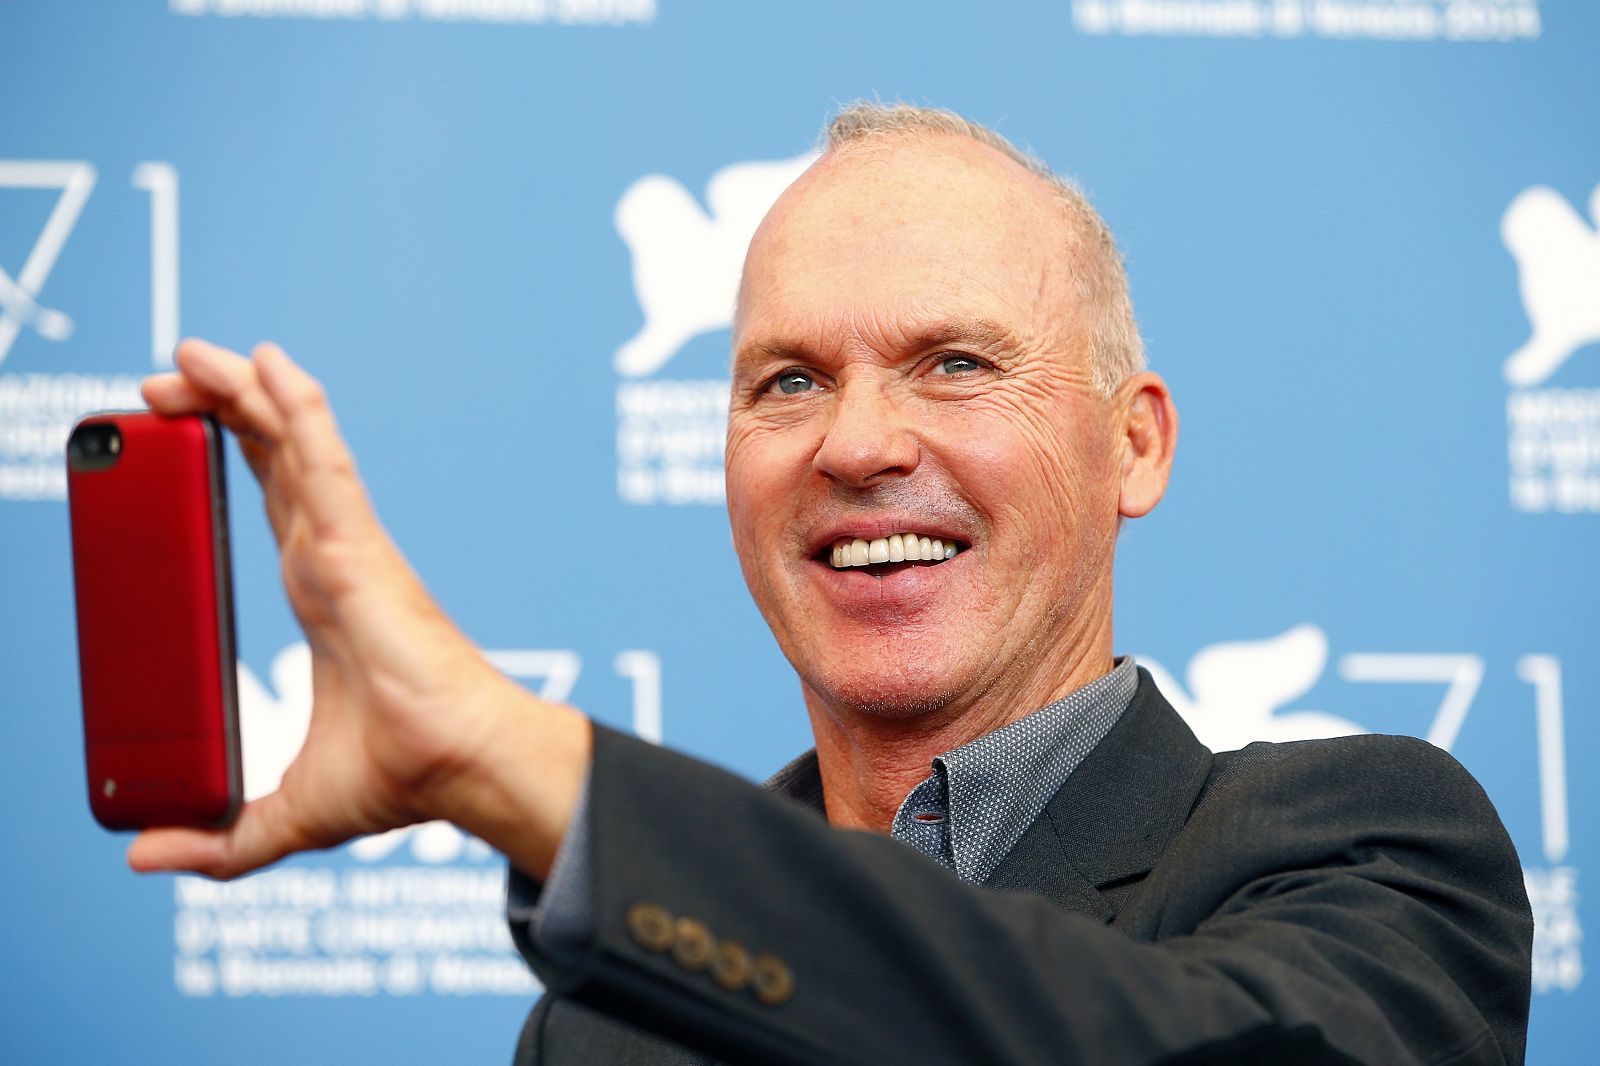 U.S. actor Michael Keaton poses during the photo call for the movie "Birdman or (The unexpected virtue of ignorance)" at the 71st Venice Film Festival